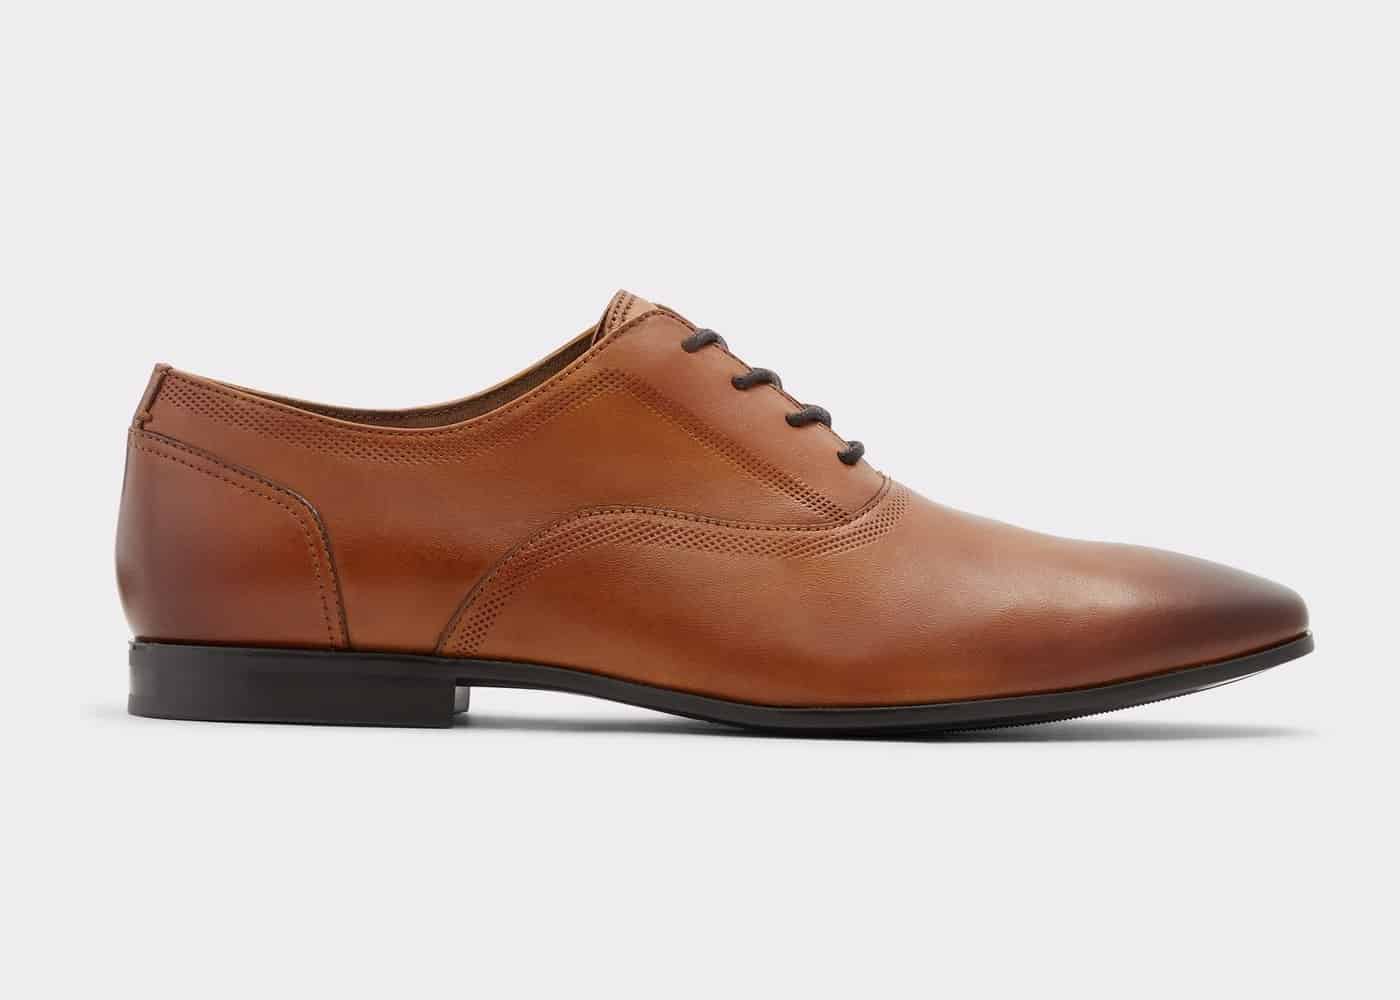 Best Oxford Shoes: 15 Men's Dress Shoes You Will Surely Love!